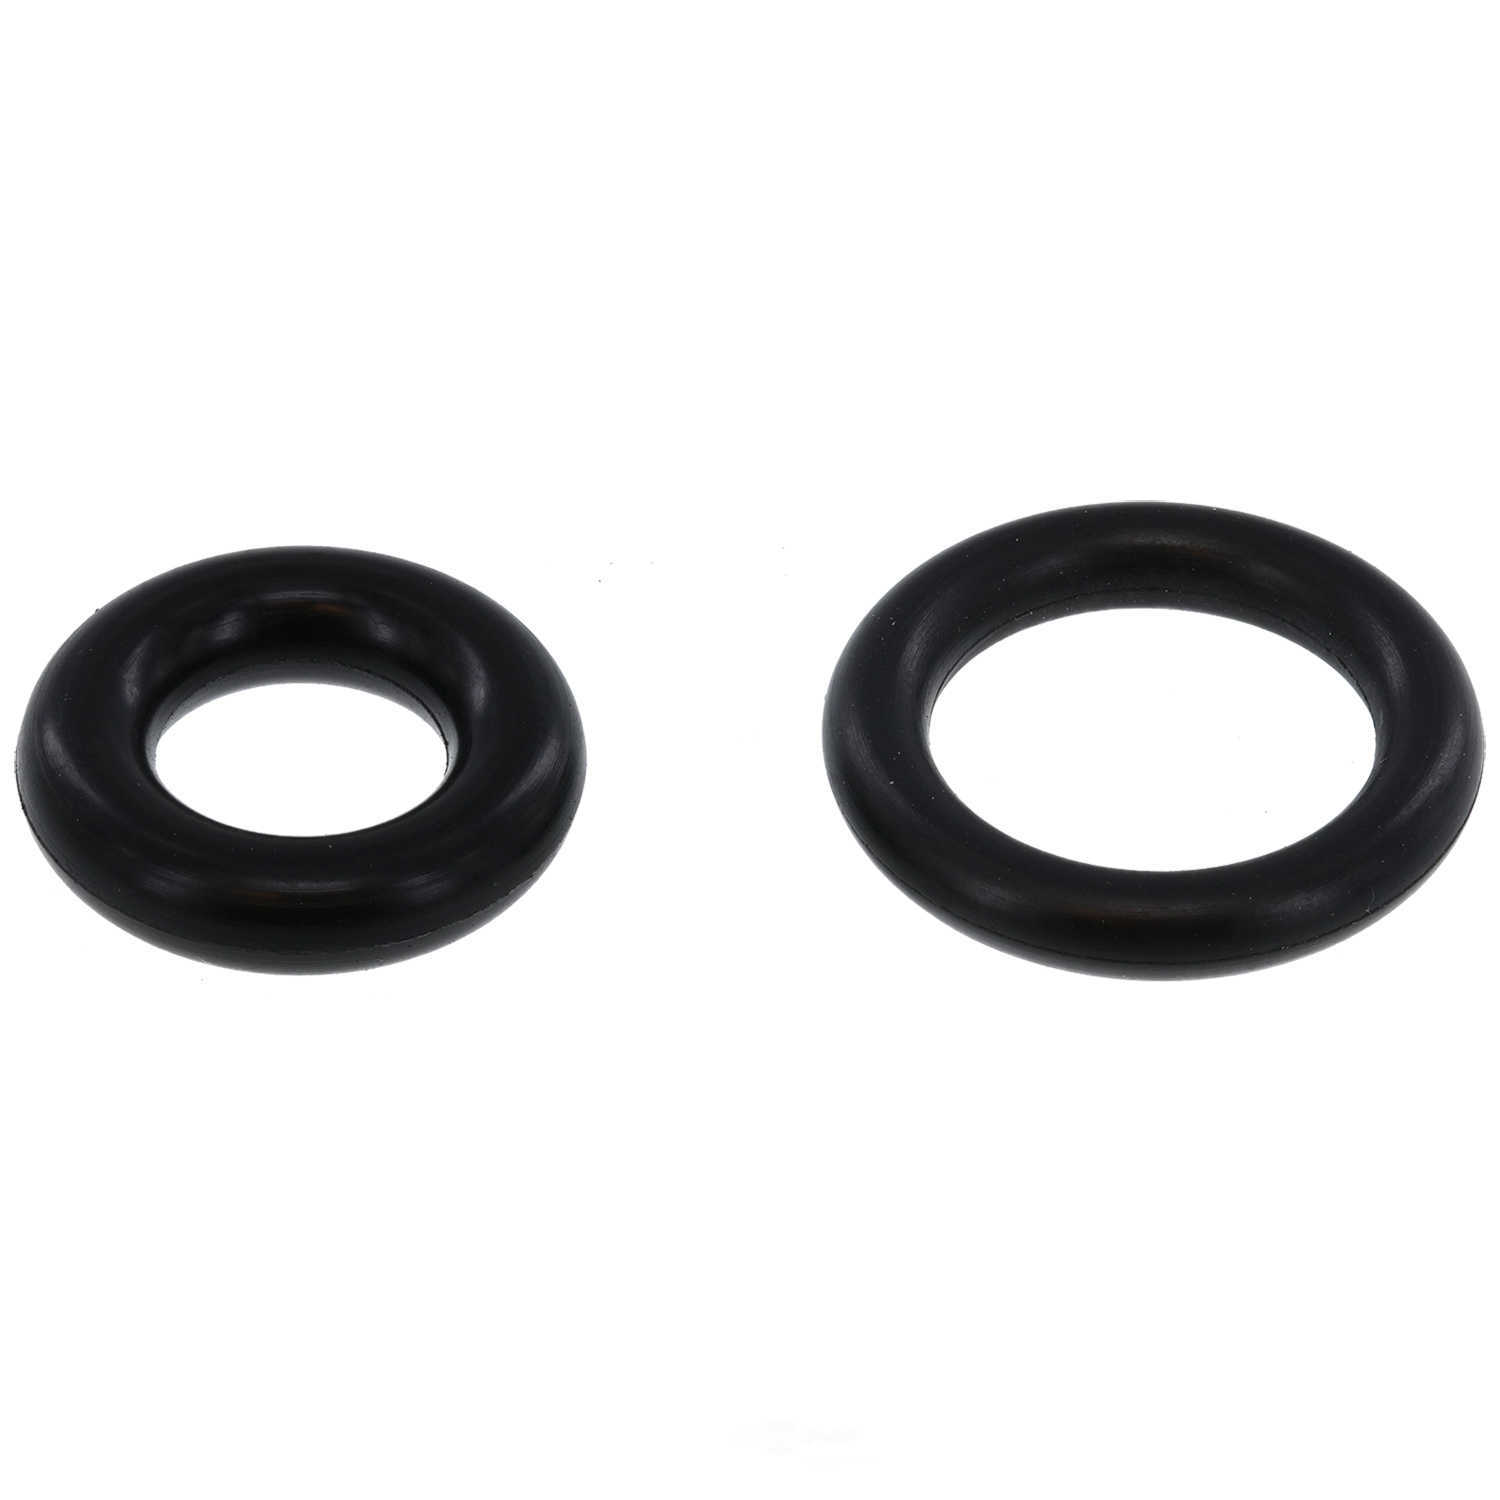 GB REMANUFACTURING INC. - Fuel Injector Seal Kit - GBR 8-075